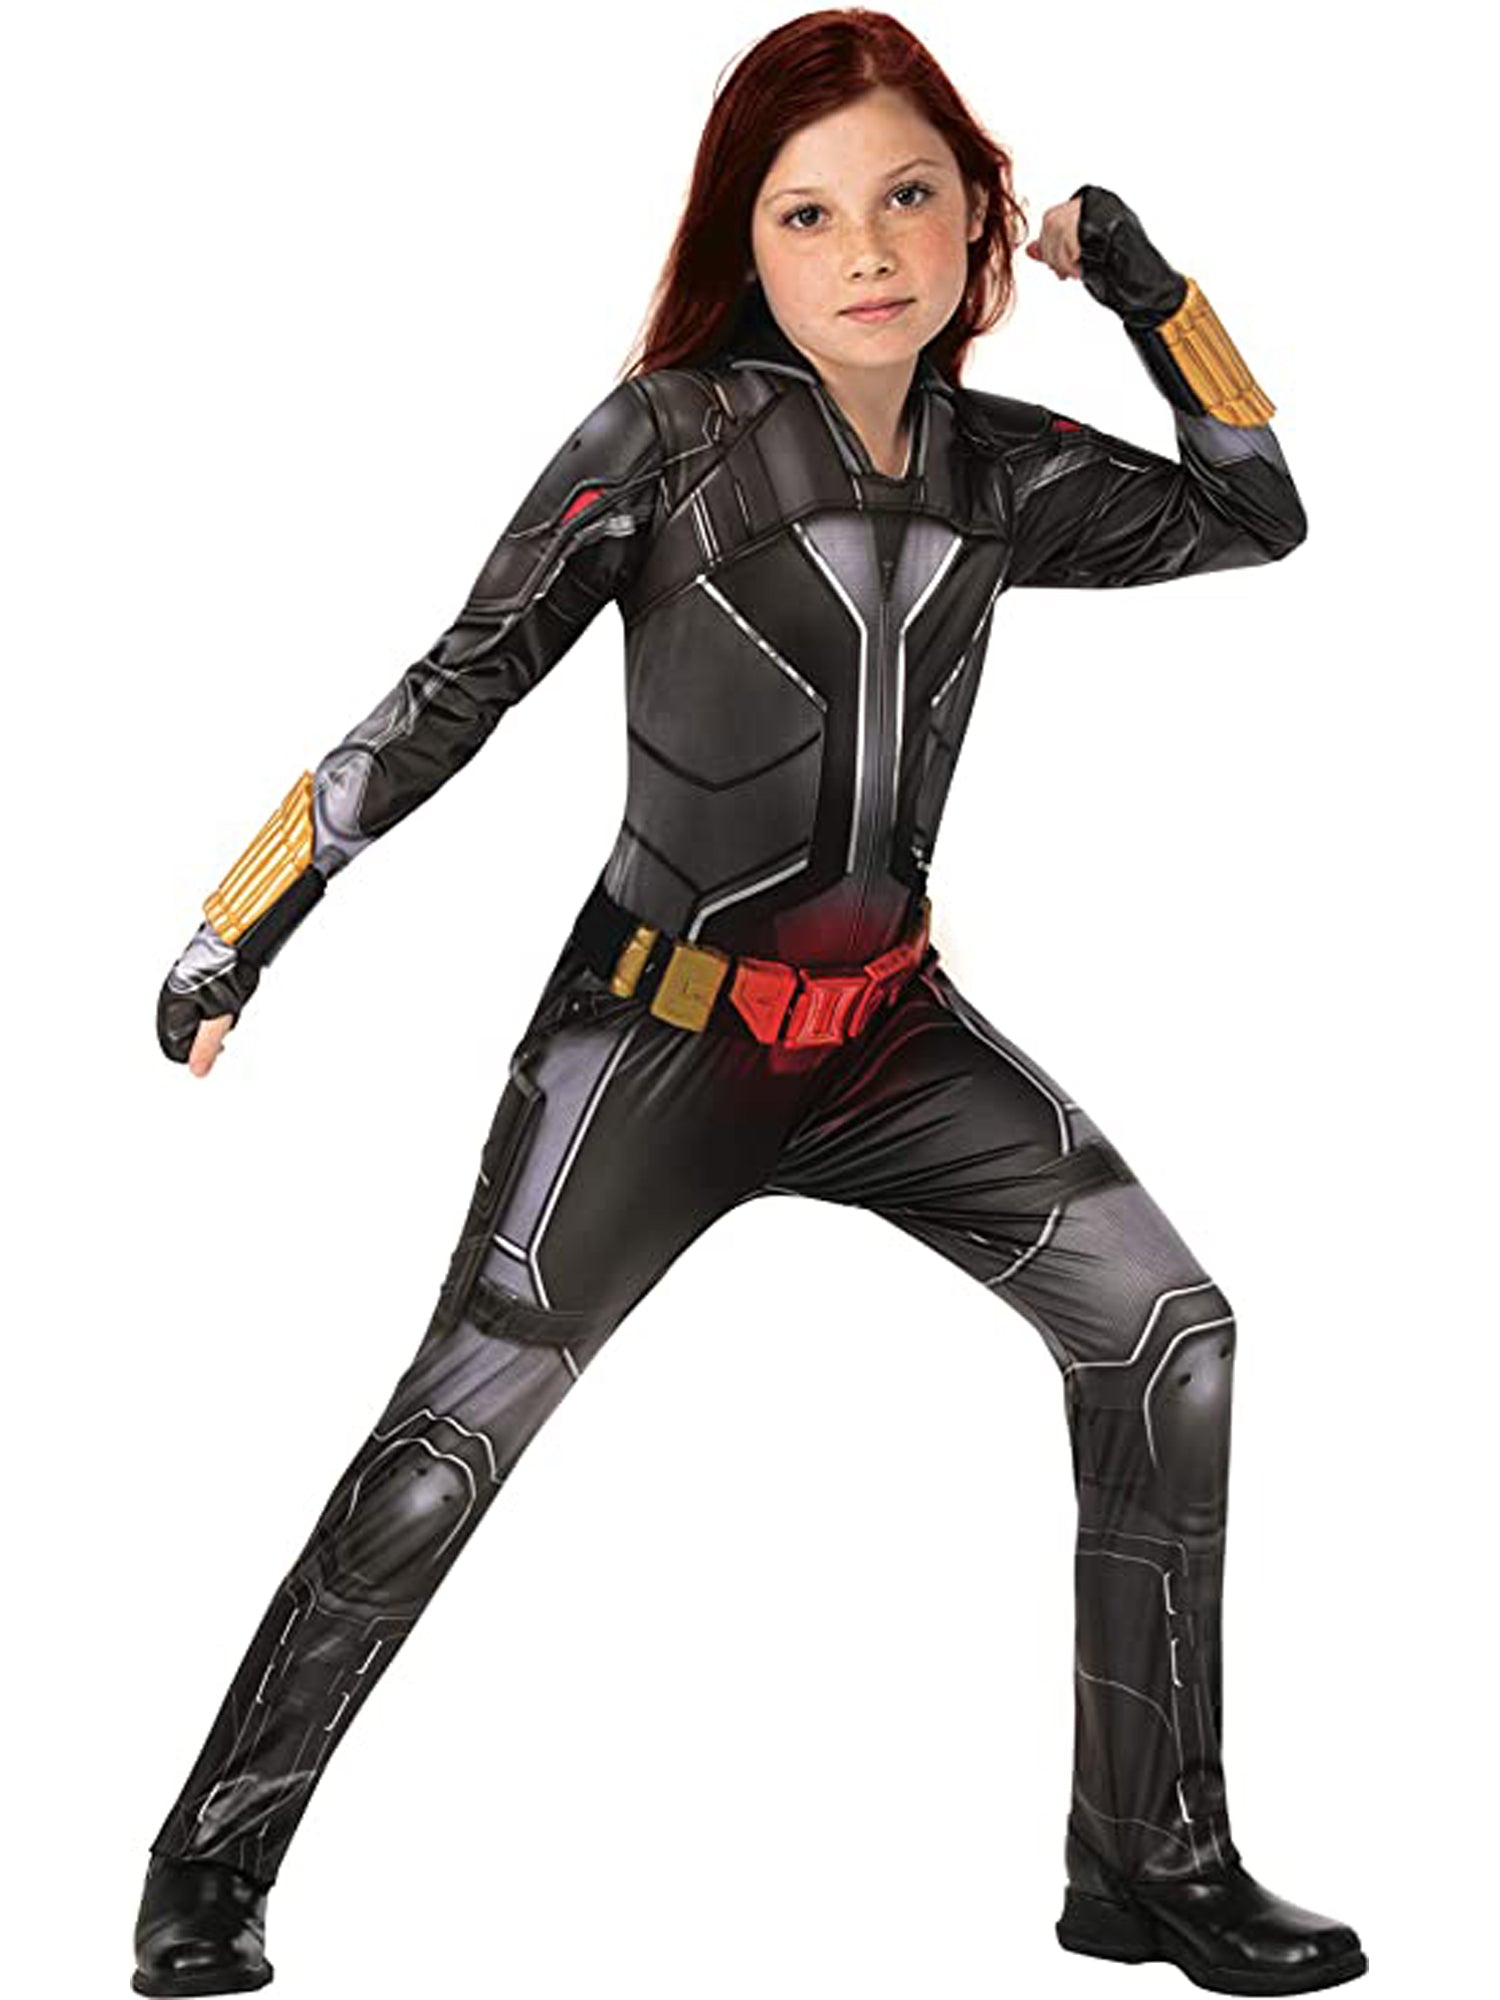 Black Widow, Black Widow, Avengers, Black Widow, Multi, Marvel, Kids Costumes, Small, Front